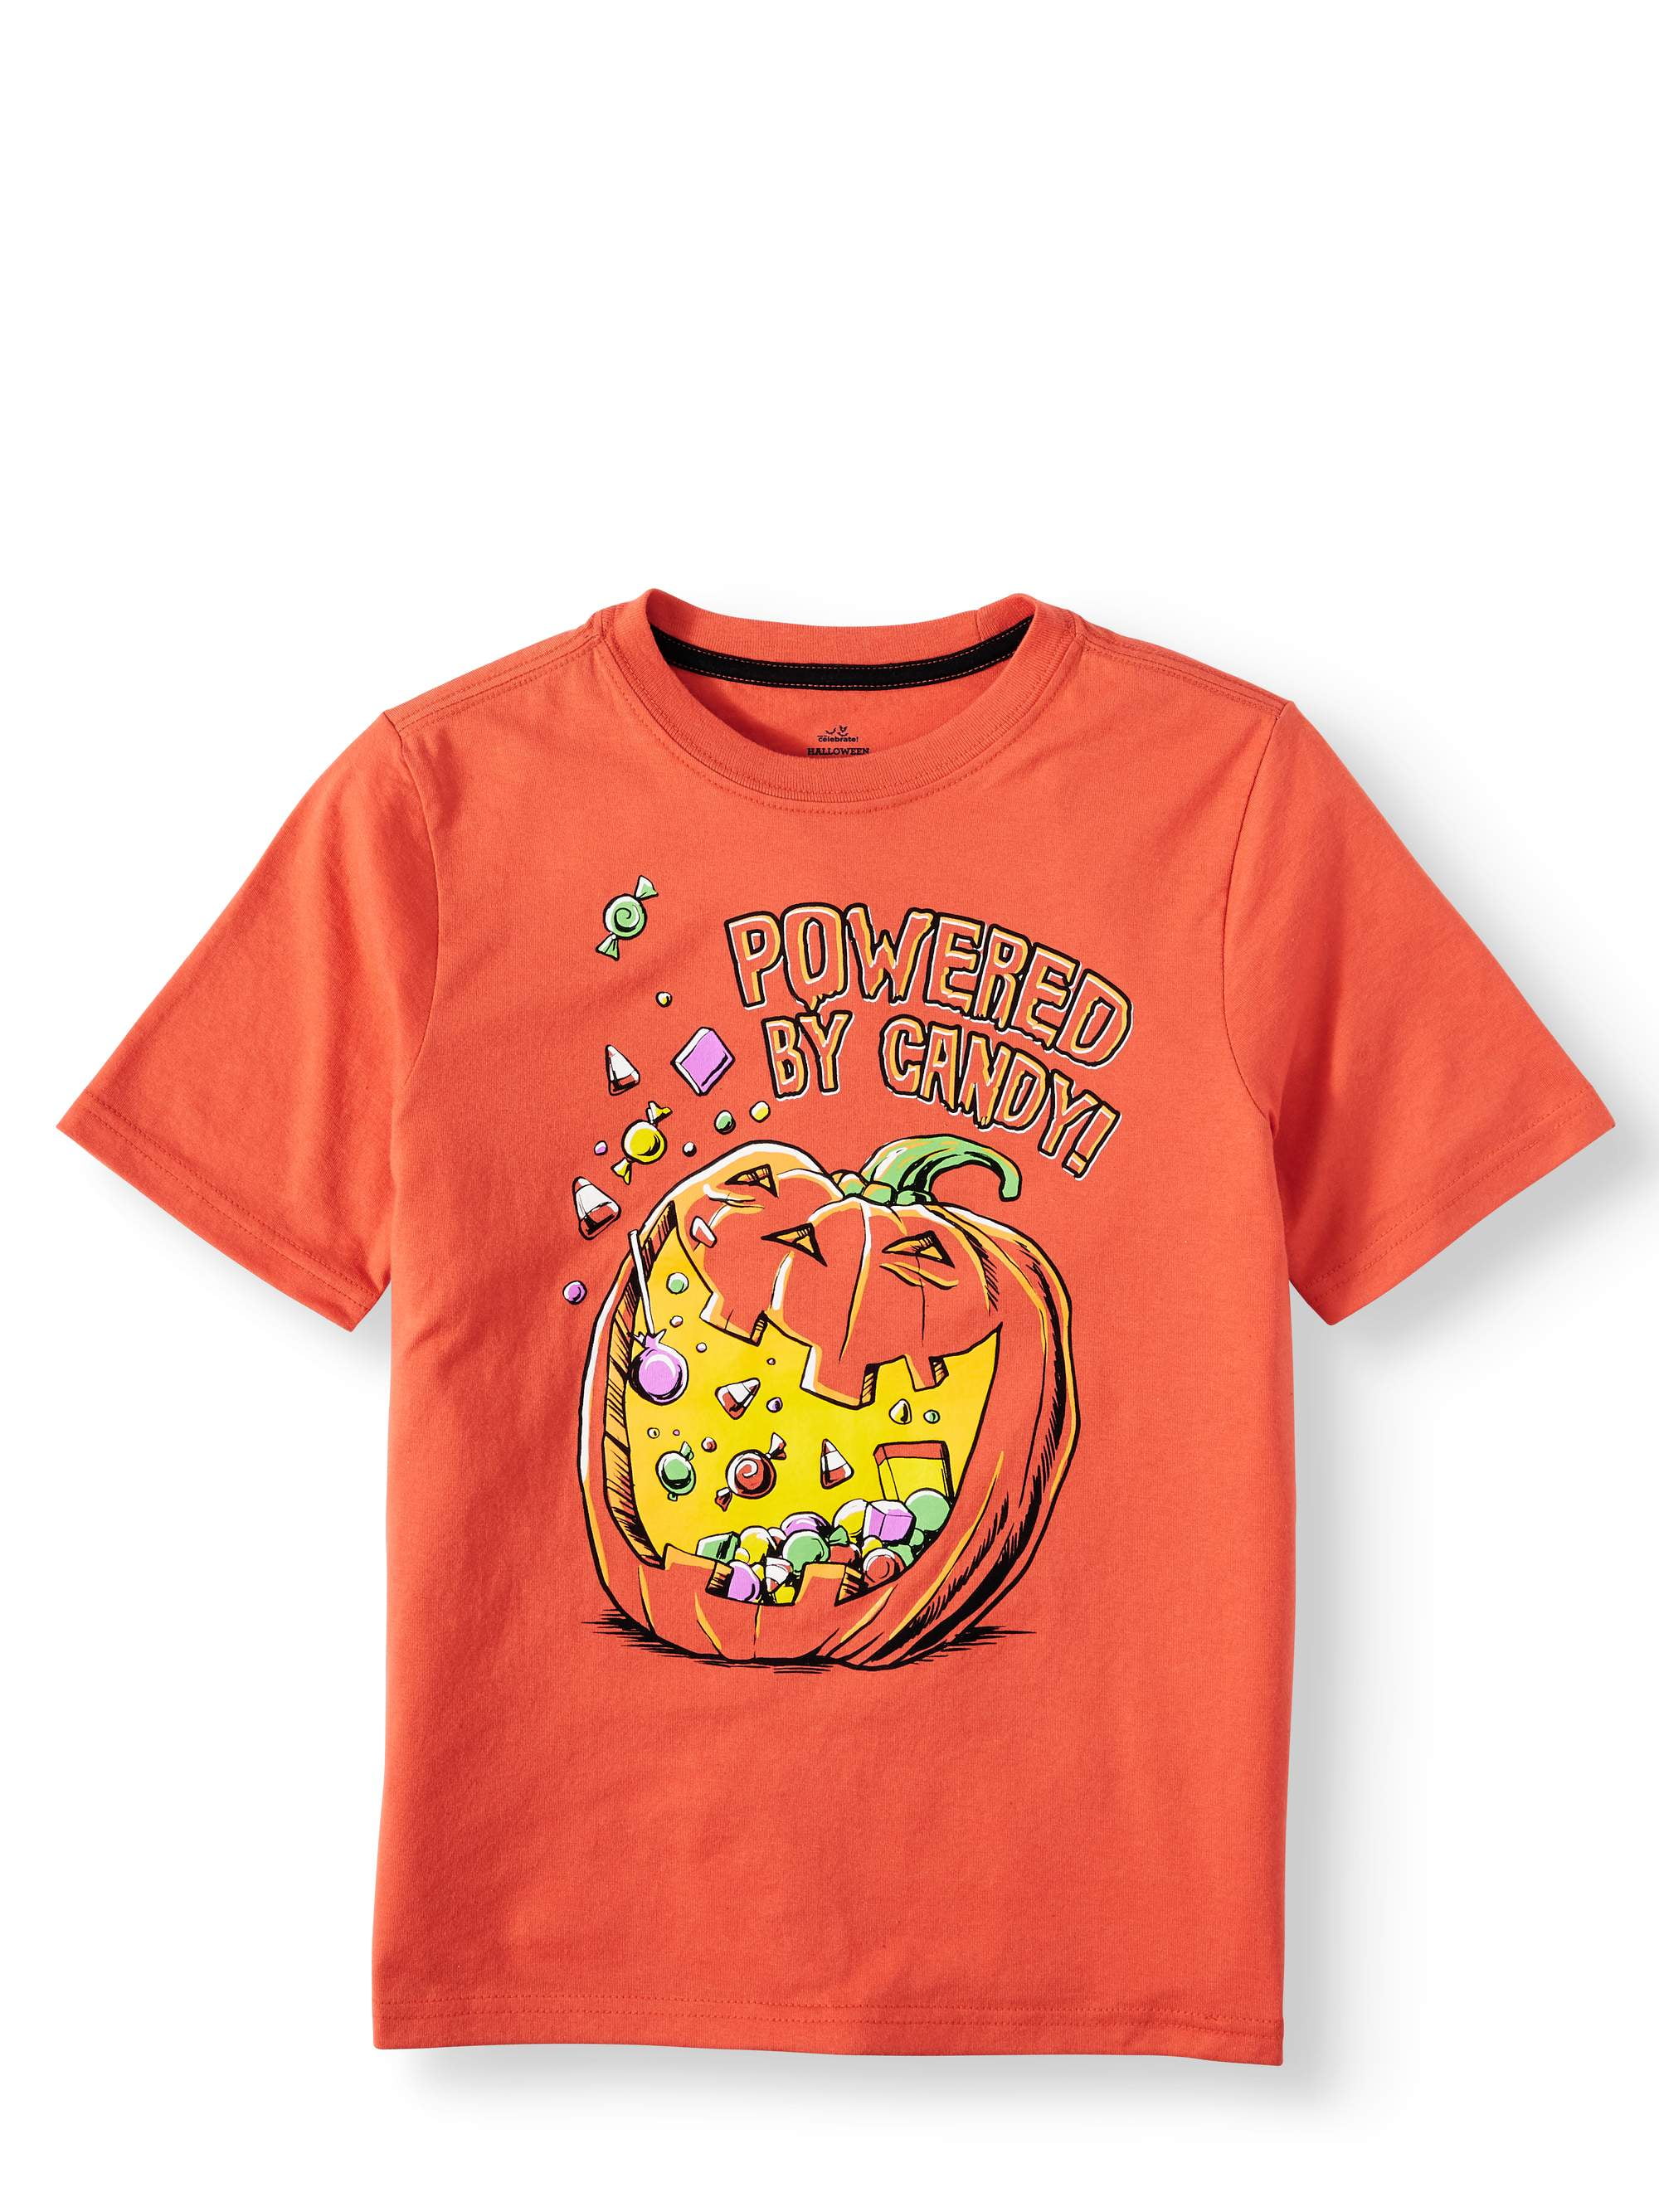 Details about   Trick Or Treat Halloween T-Shirt Youth Medium Black NEW